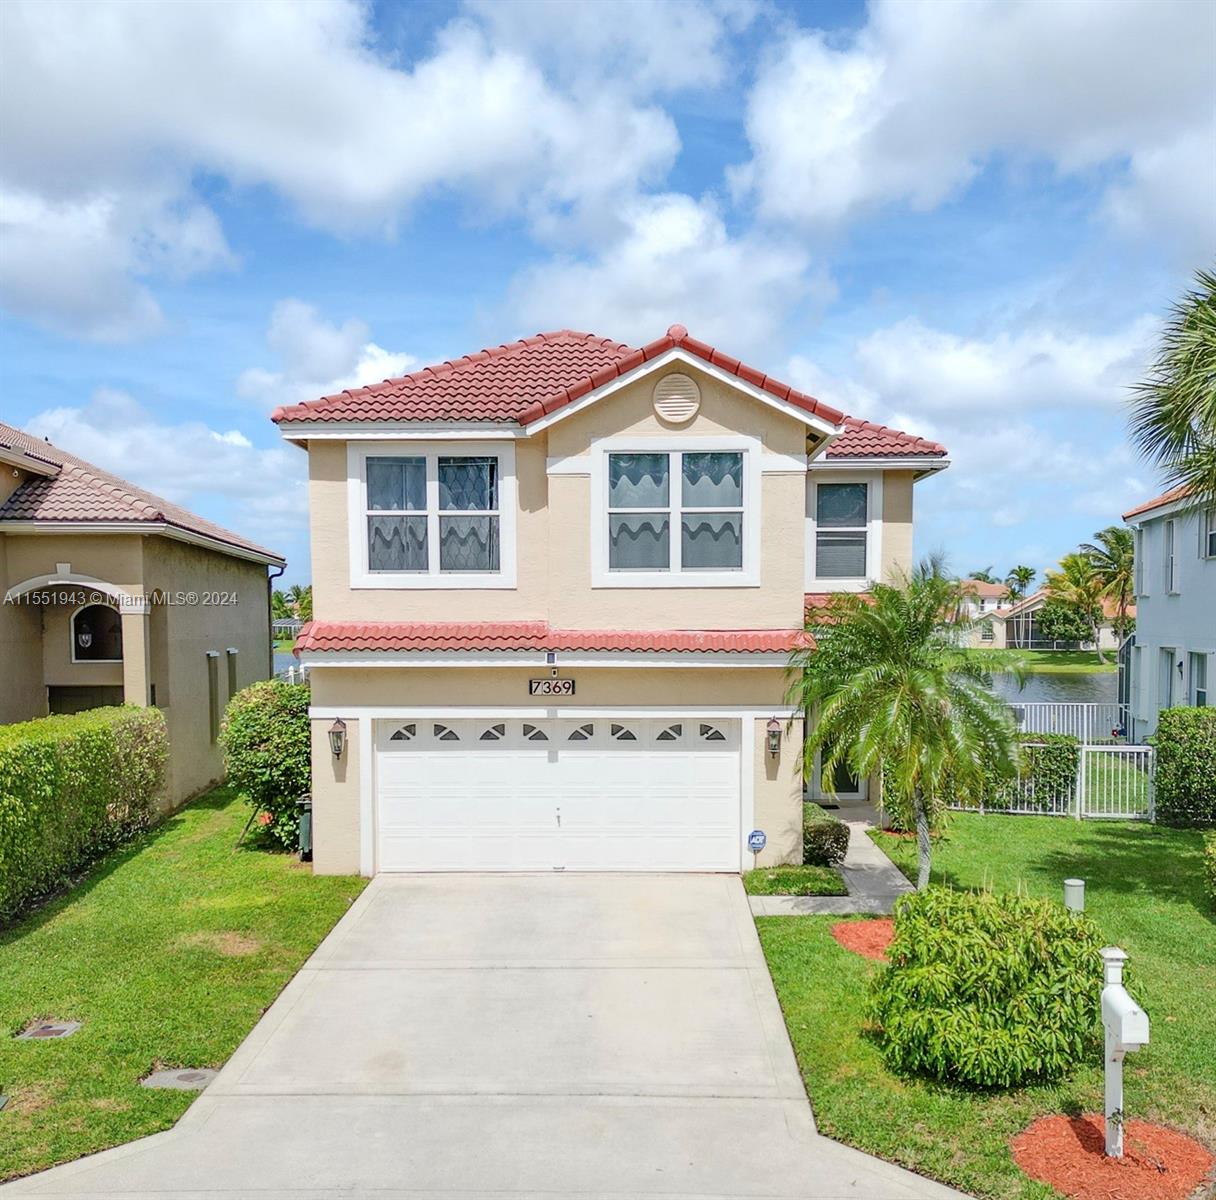 7369 Wescott Ter Ter, Lake Worth, Palm Beach County, Florida - 4 Bedrooms  
3 Bathrooms - 